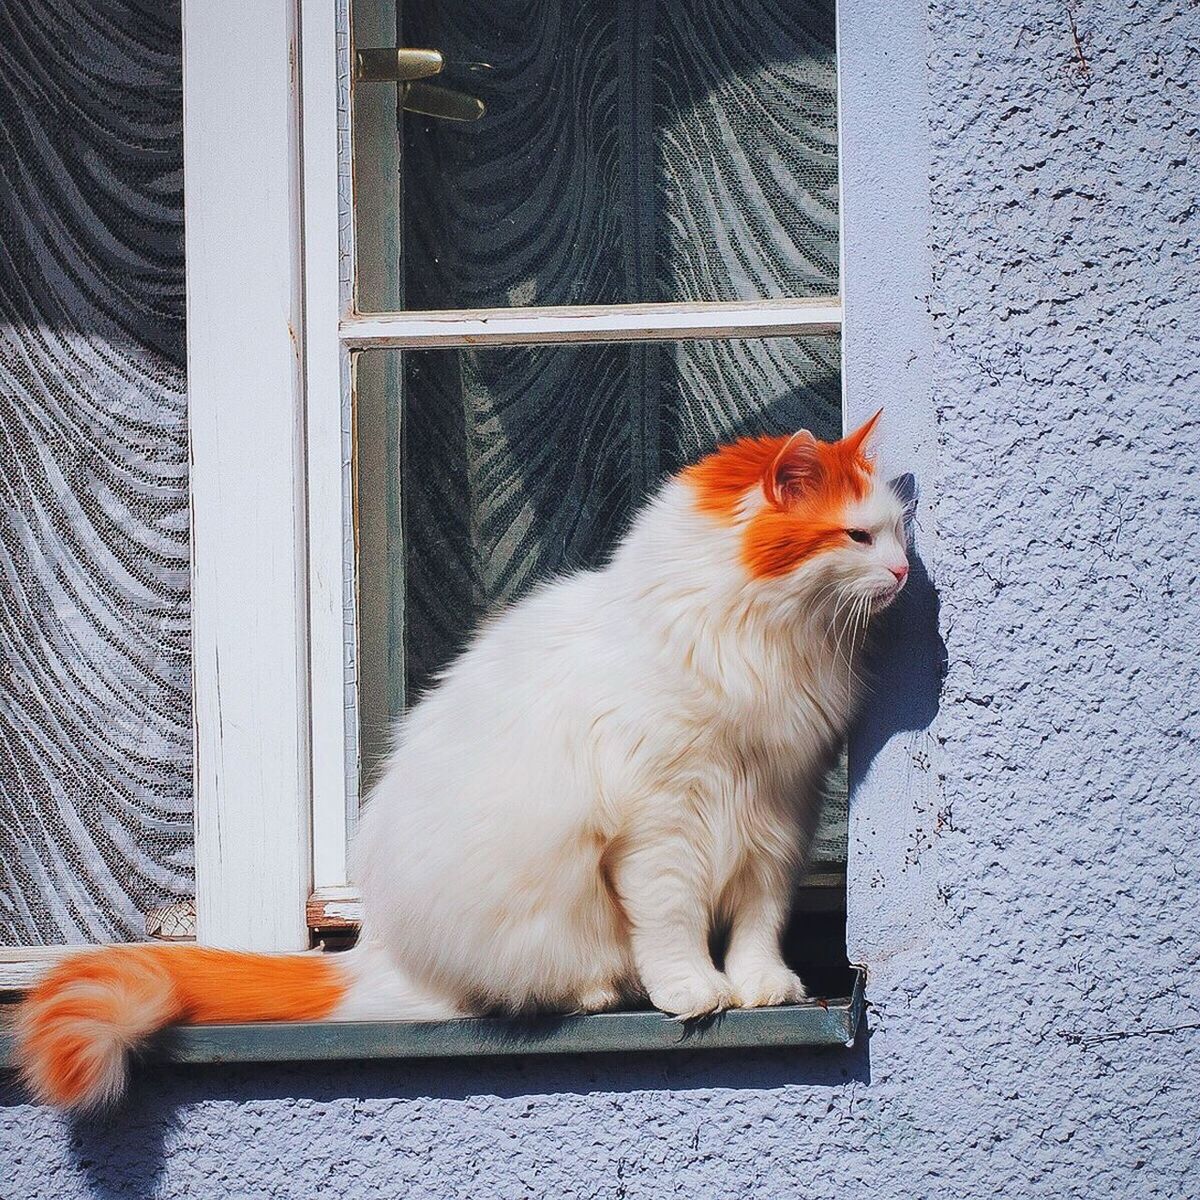 Cat sitting on window sill during sunny day